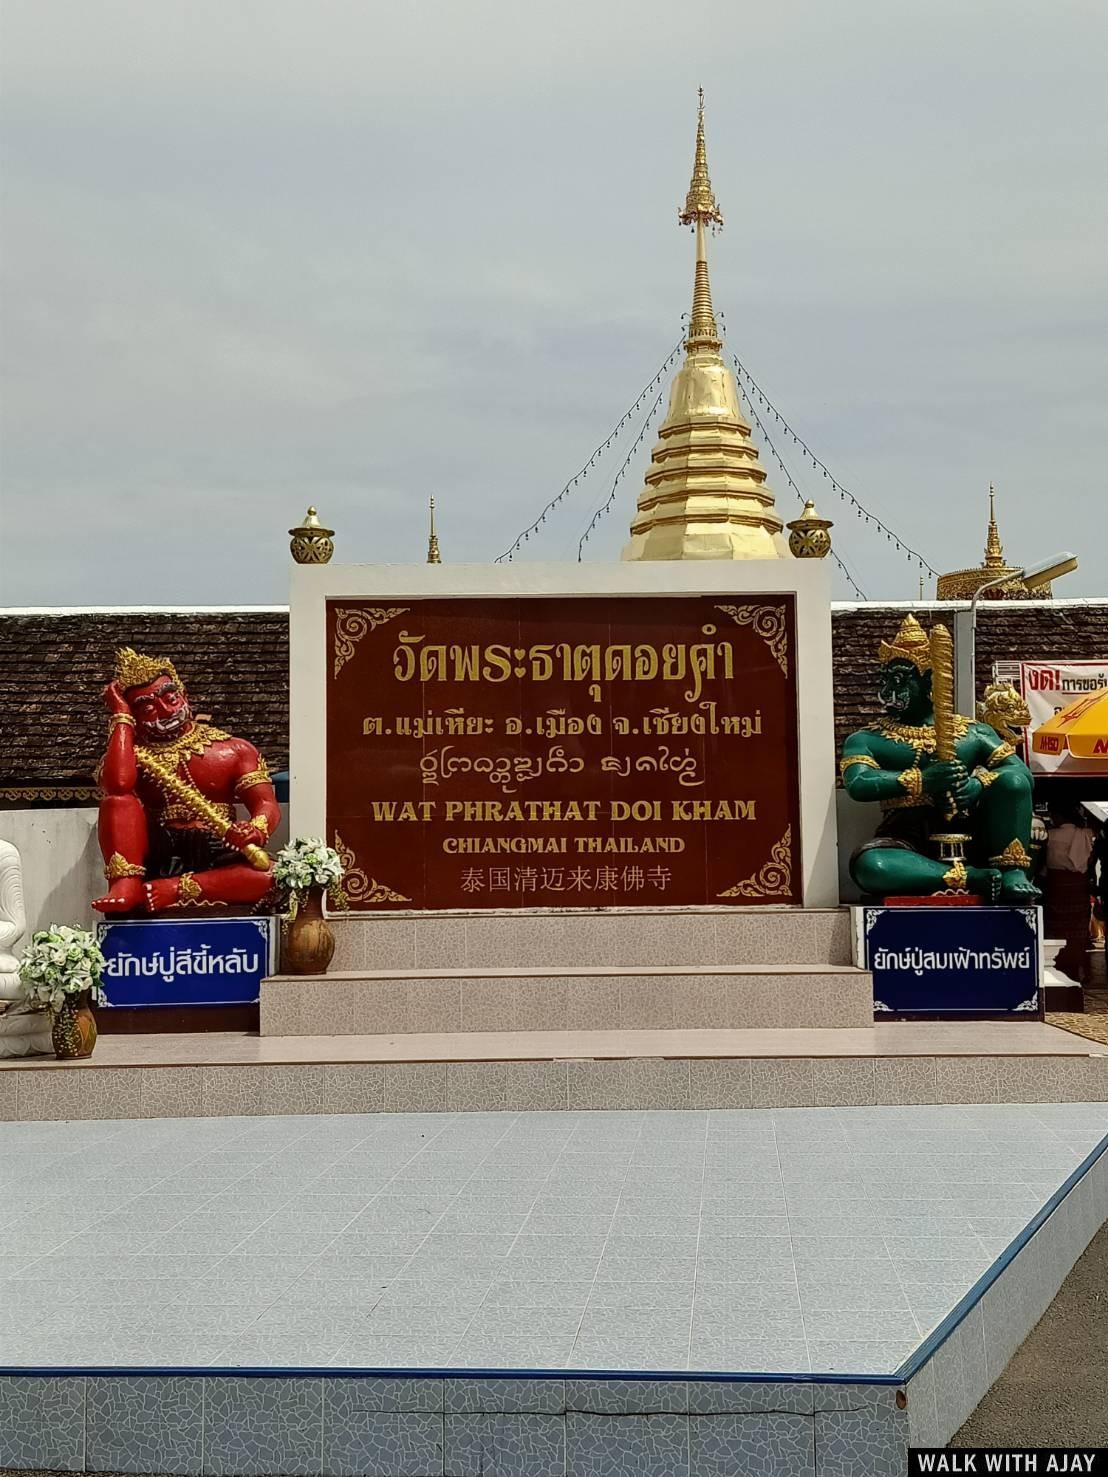 Driving Motorbike From Mae Klang Luang to Chiangmai : Thailand (Apr’21) – Day 6 22